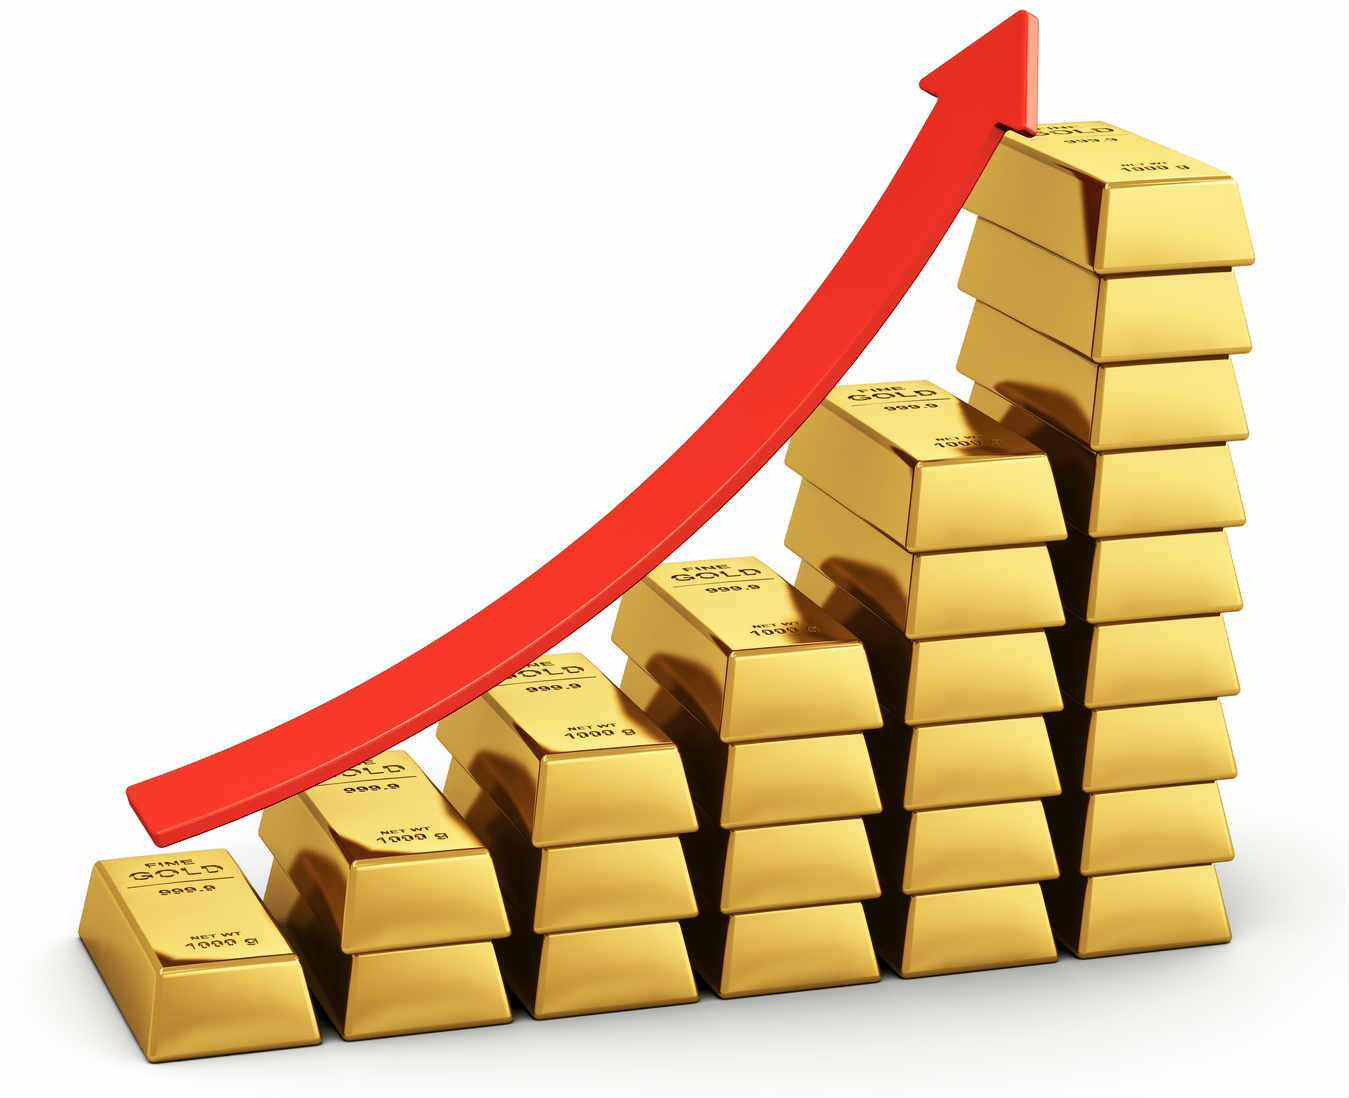 Price of gold rise by Rs 300 per tola today